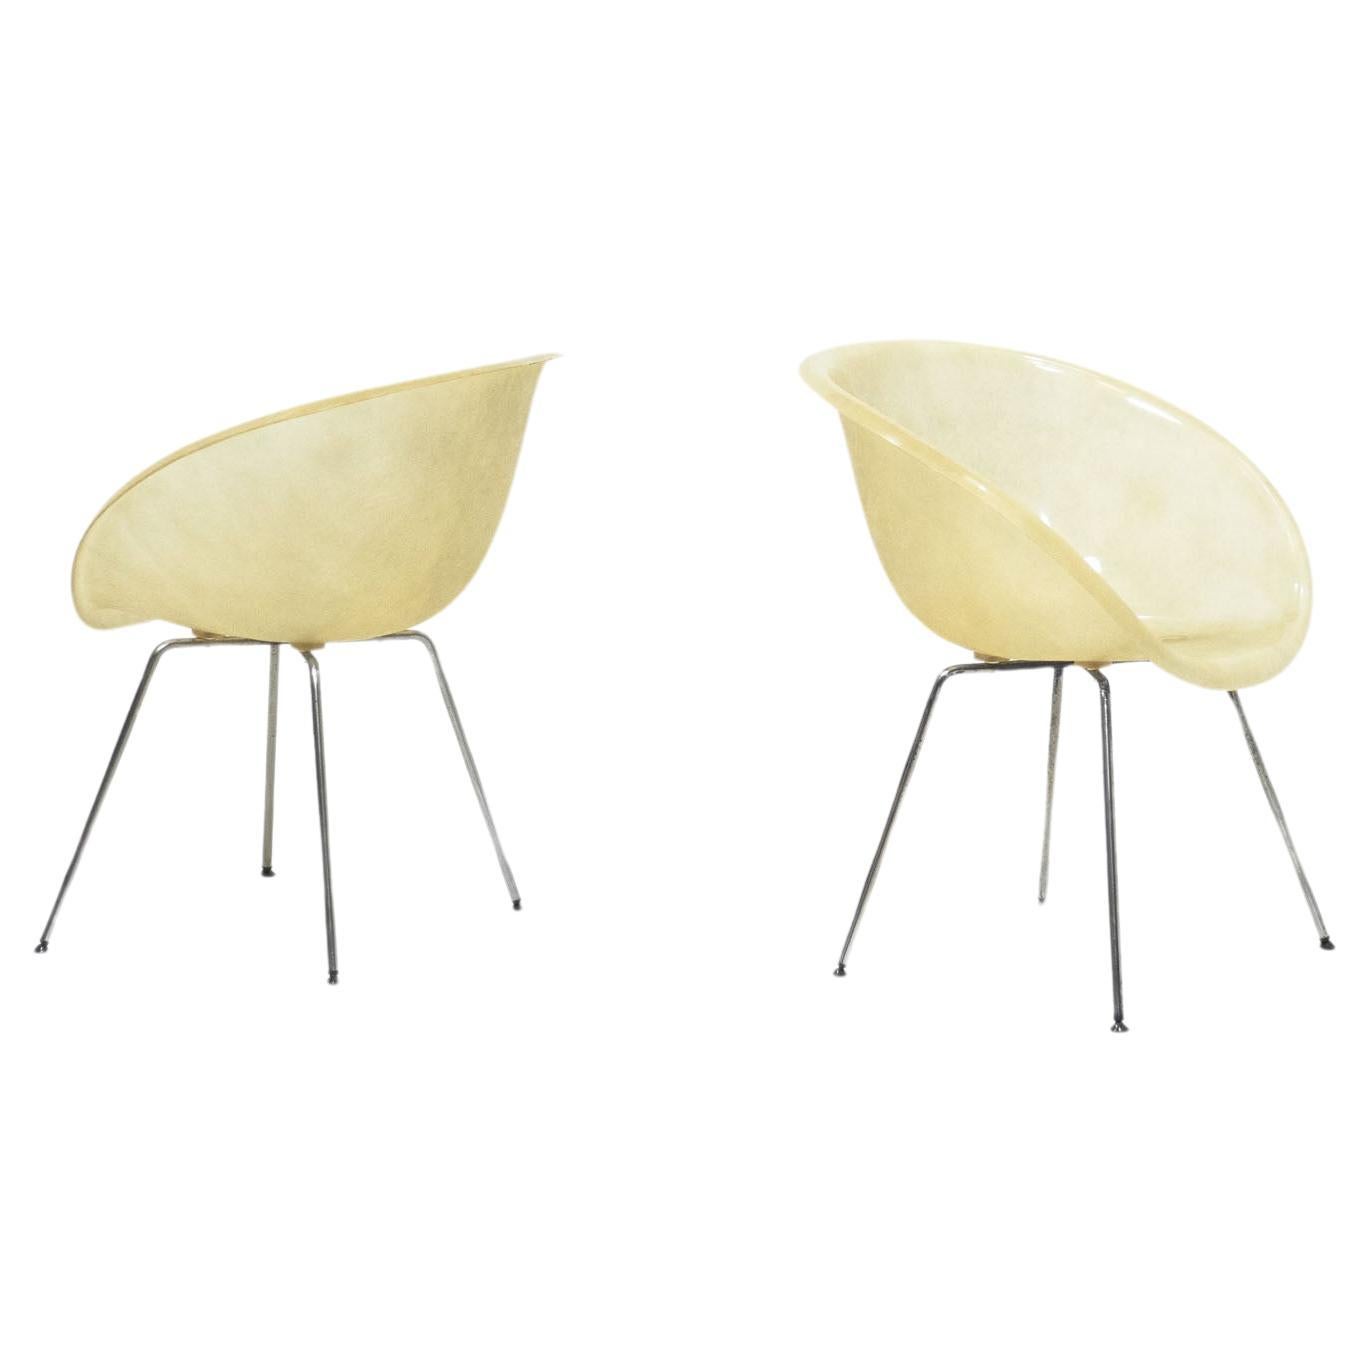 Set of two vintage fiber glass shell chairs For Sale